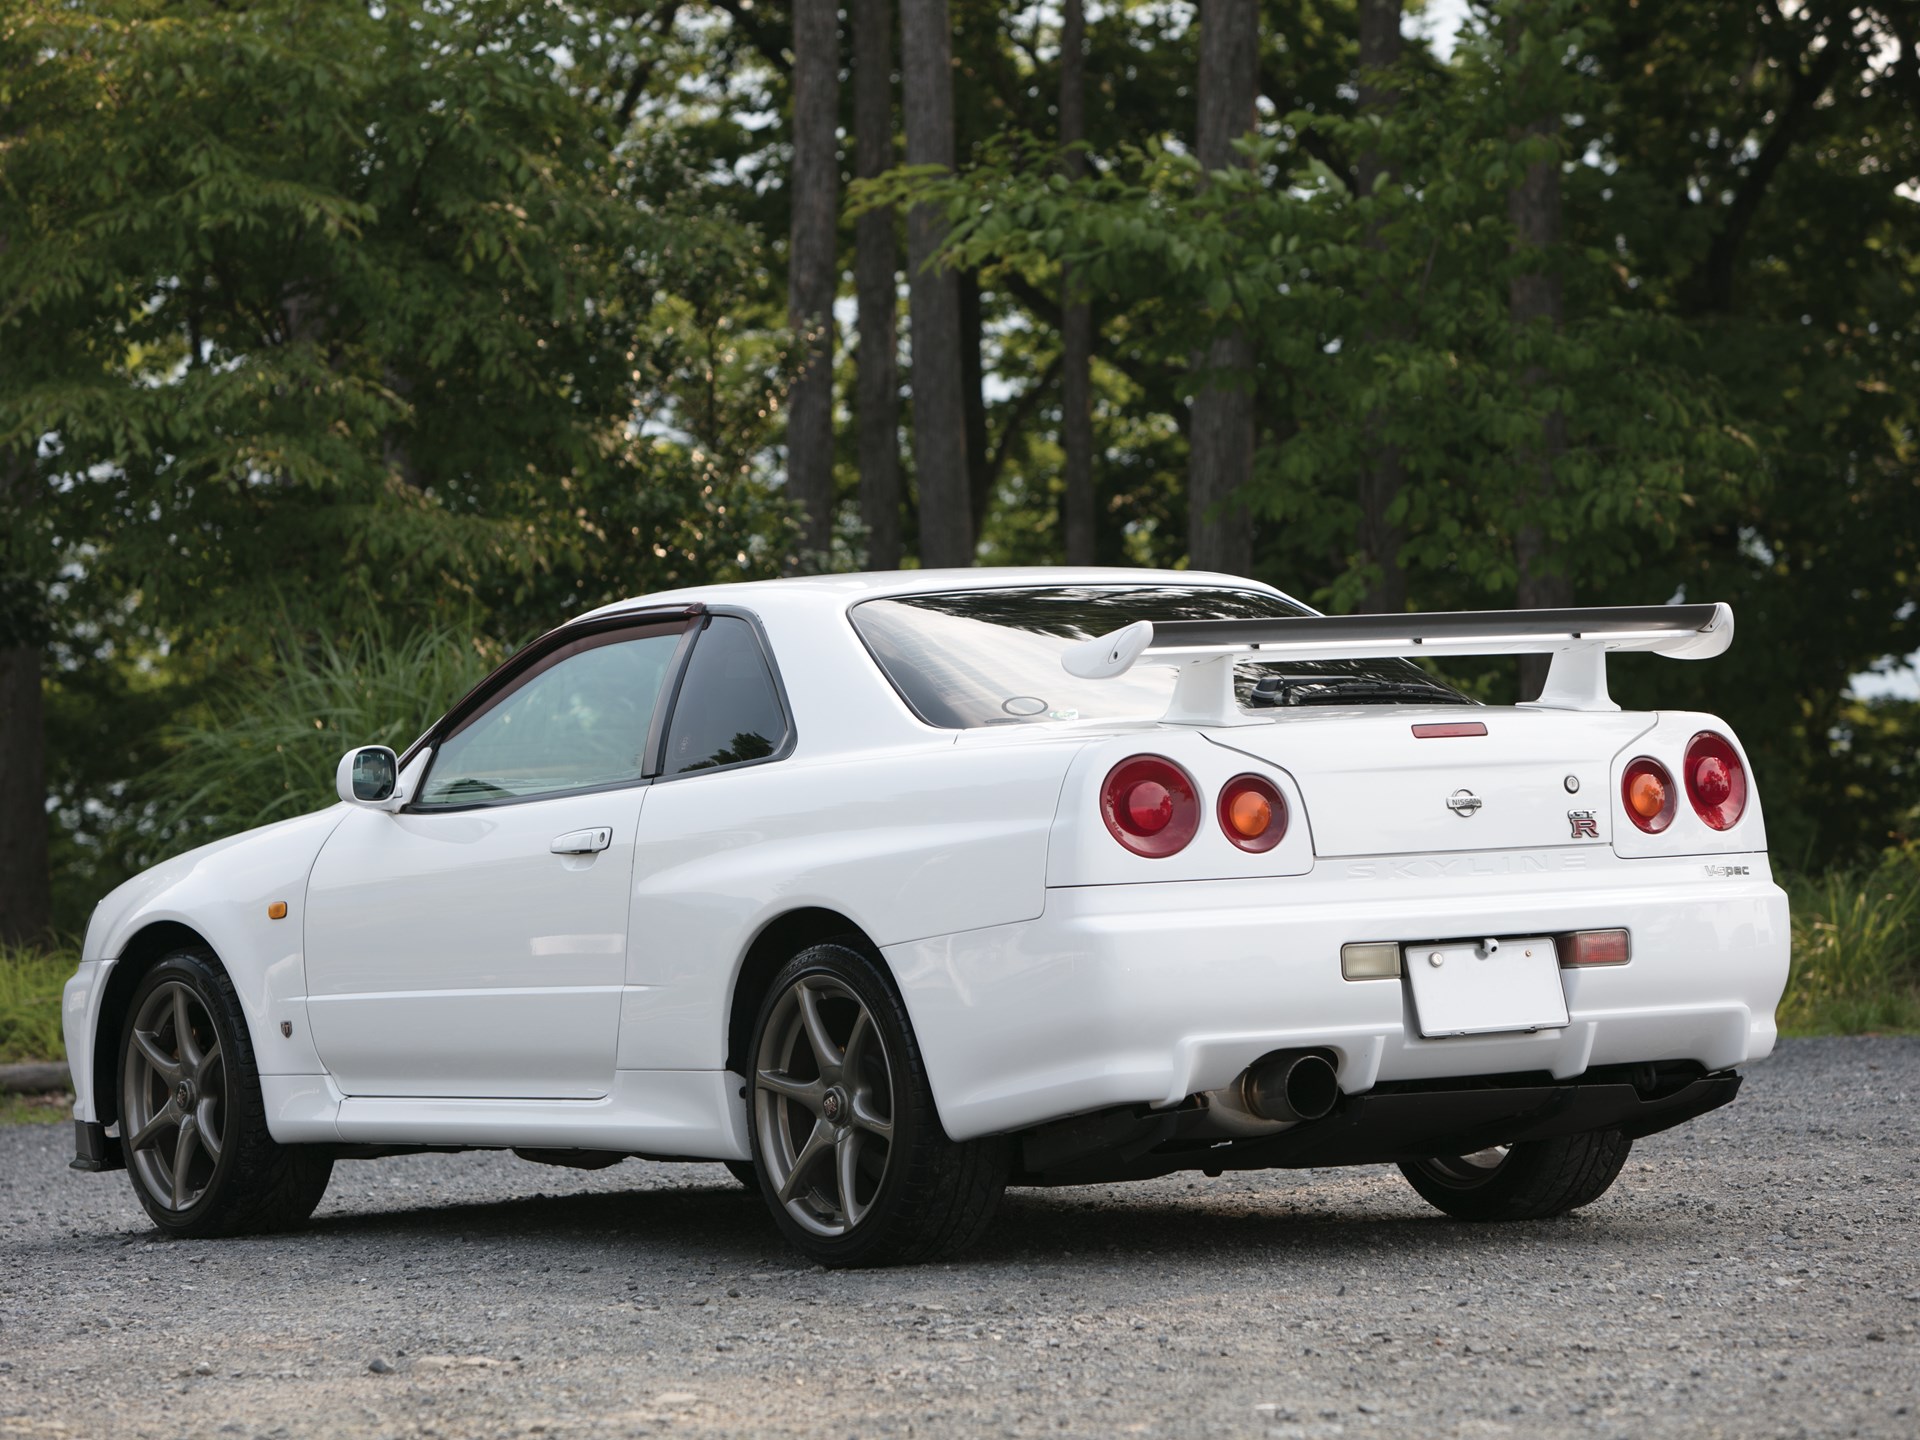 Buying A Nissan Skyline R34 Gt R Ultimate Guide Garage Dreams